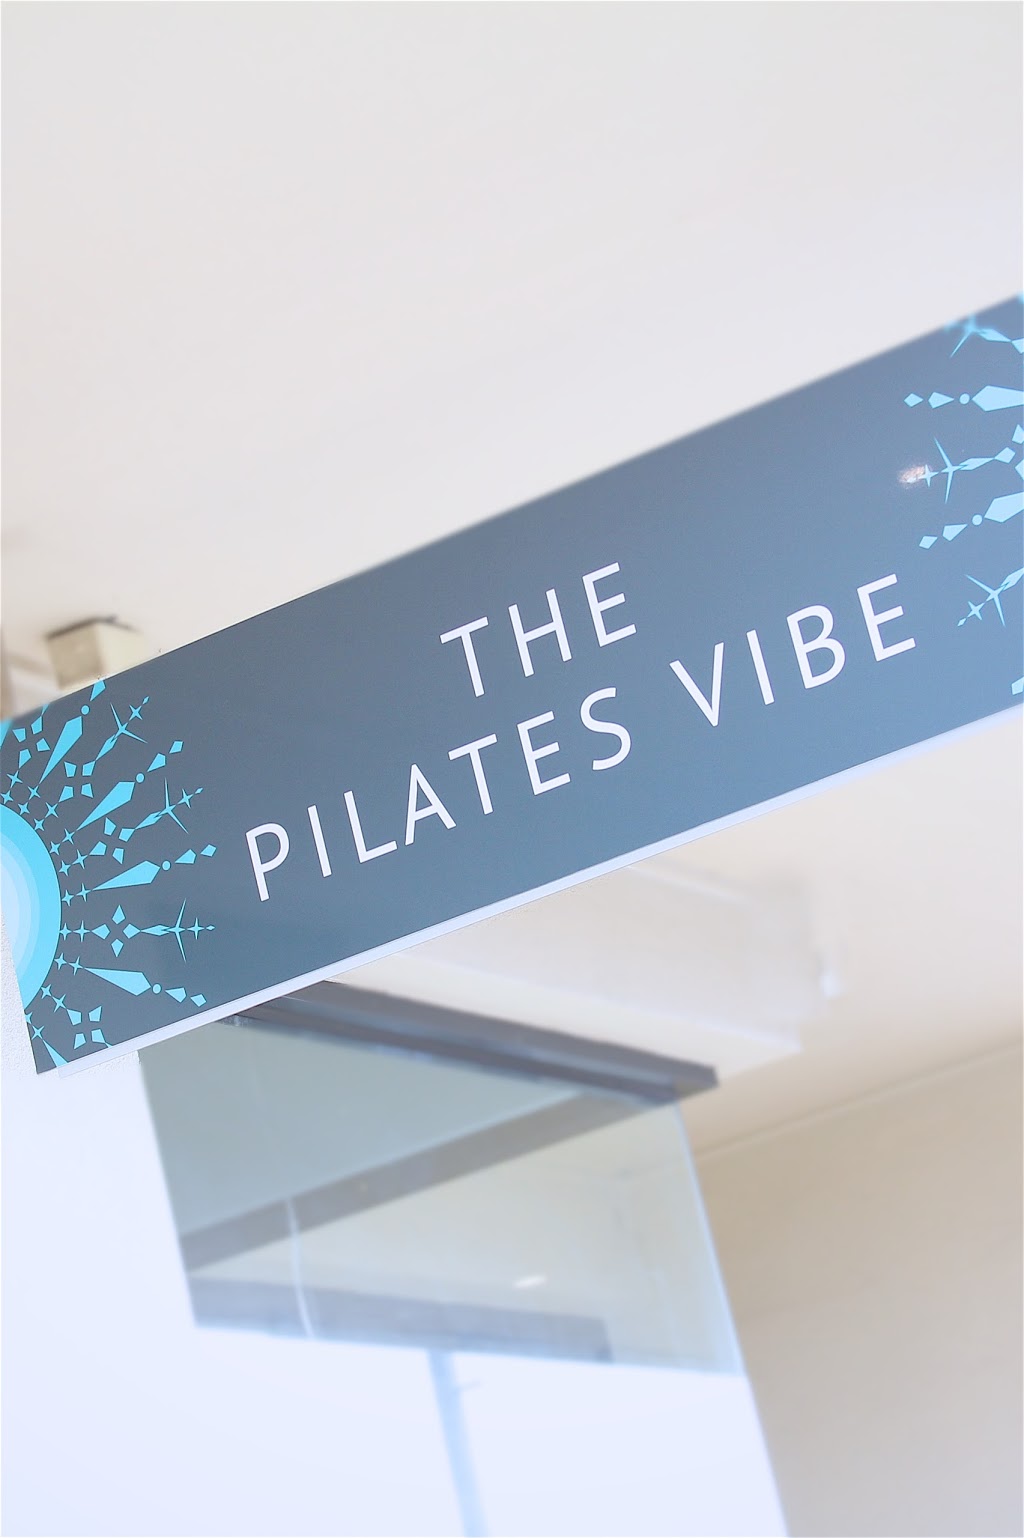 The Pilates Vibe | gym | 2/132 Nepean Hwy, Aspendale VIC 3195, Australia | 0413443490 OR +61 413 443 490